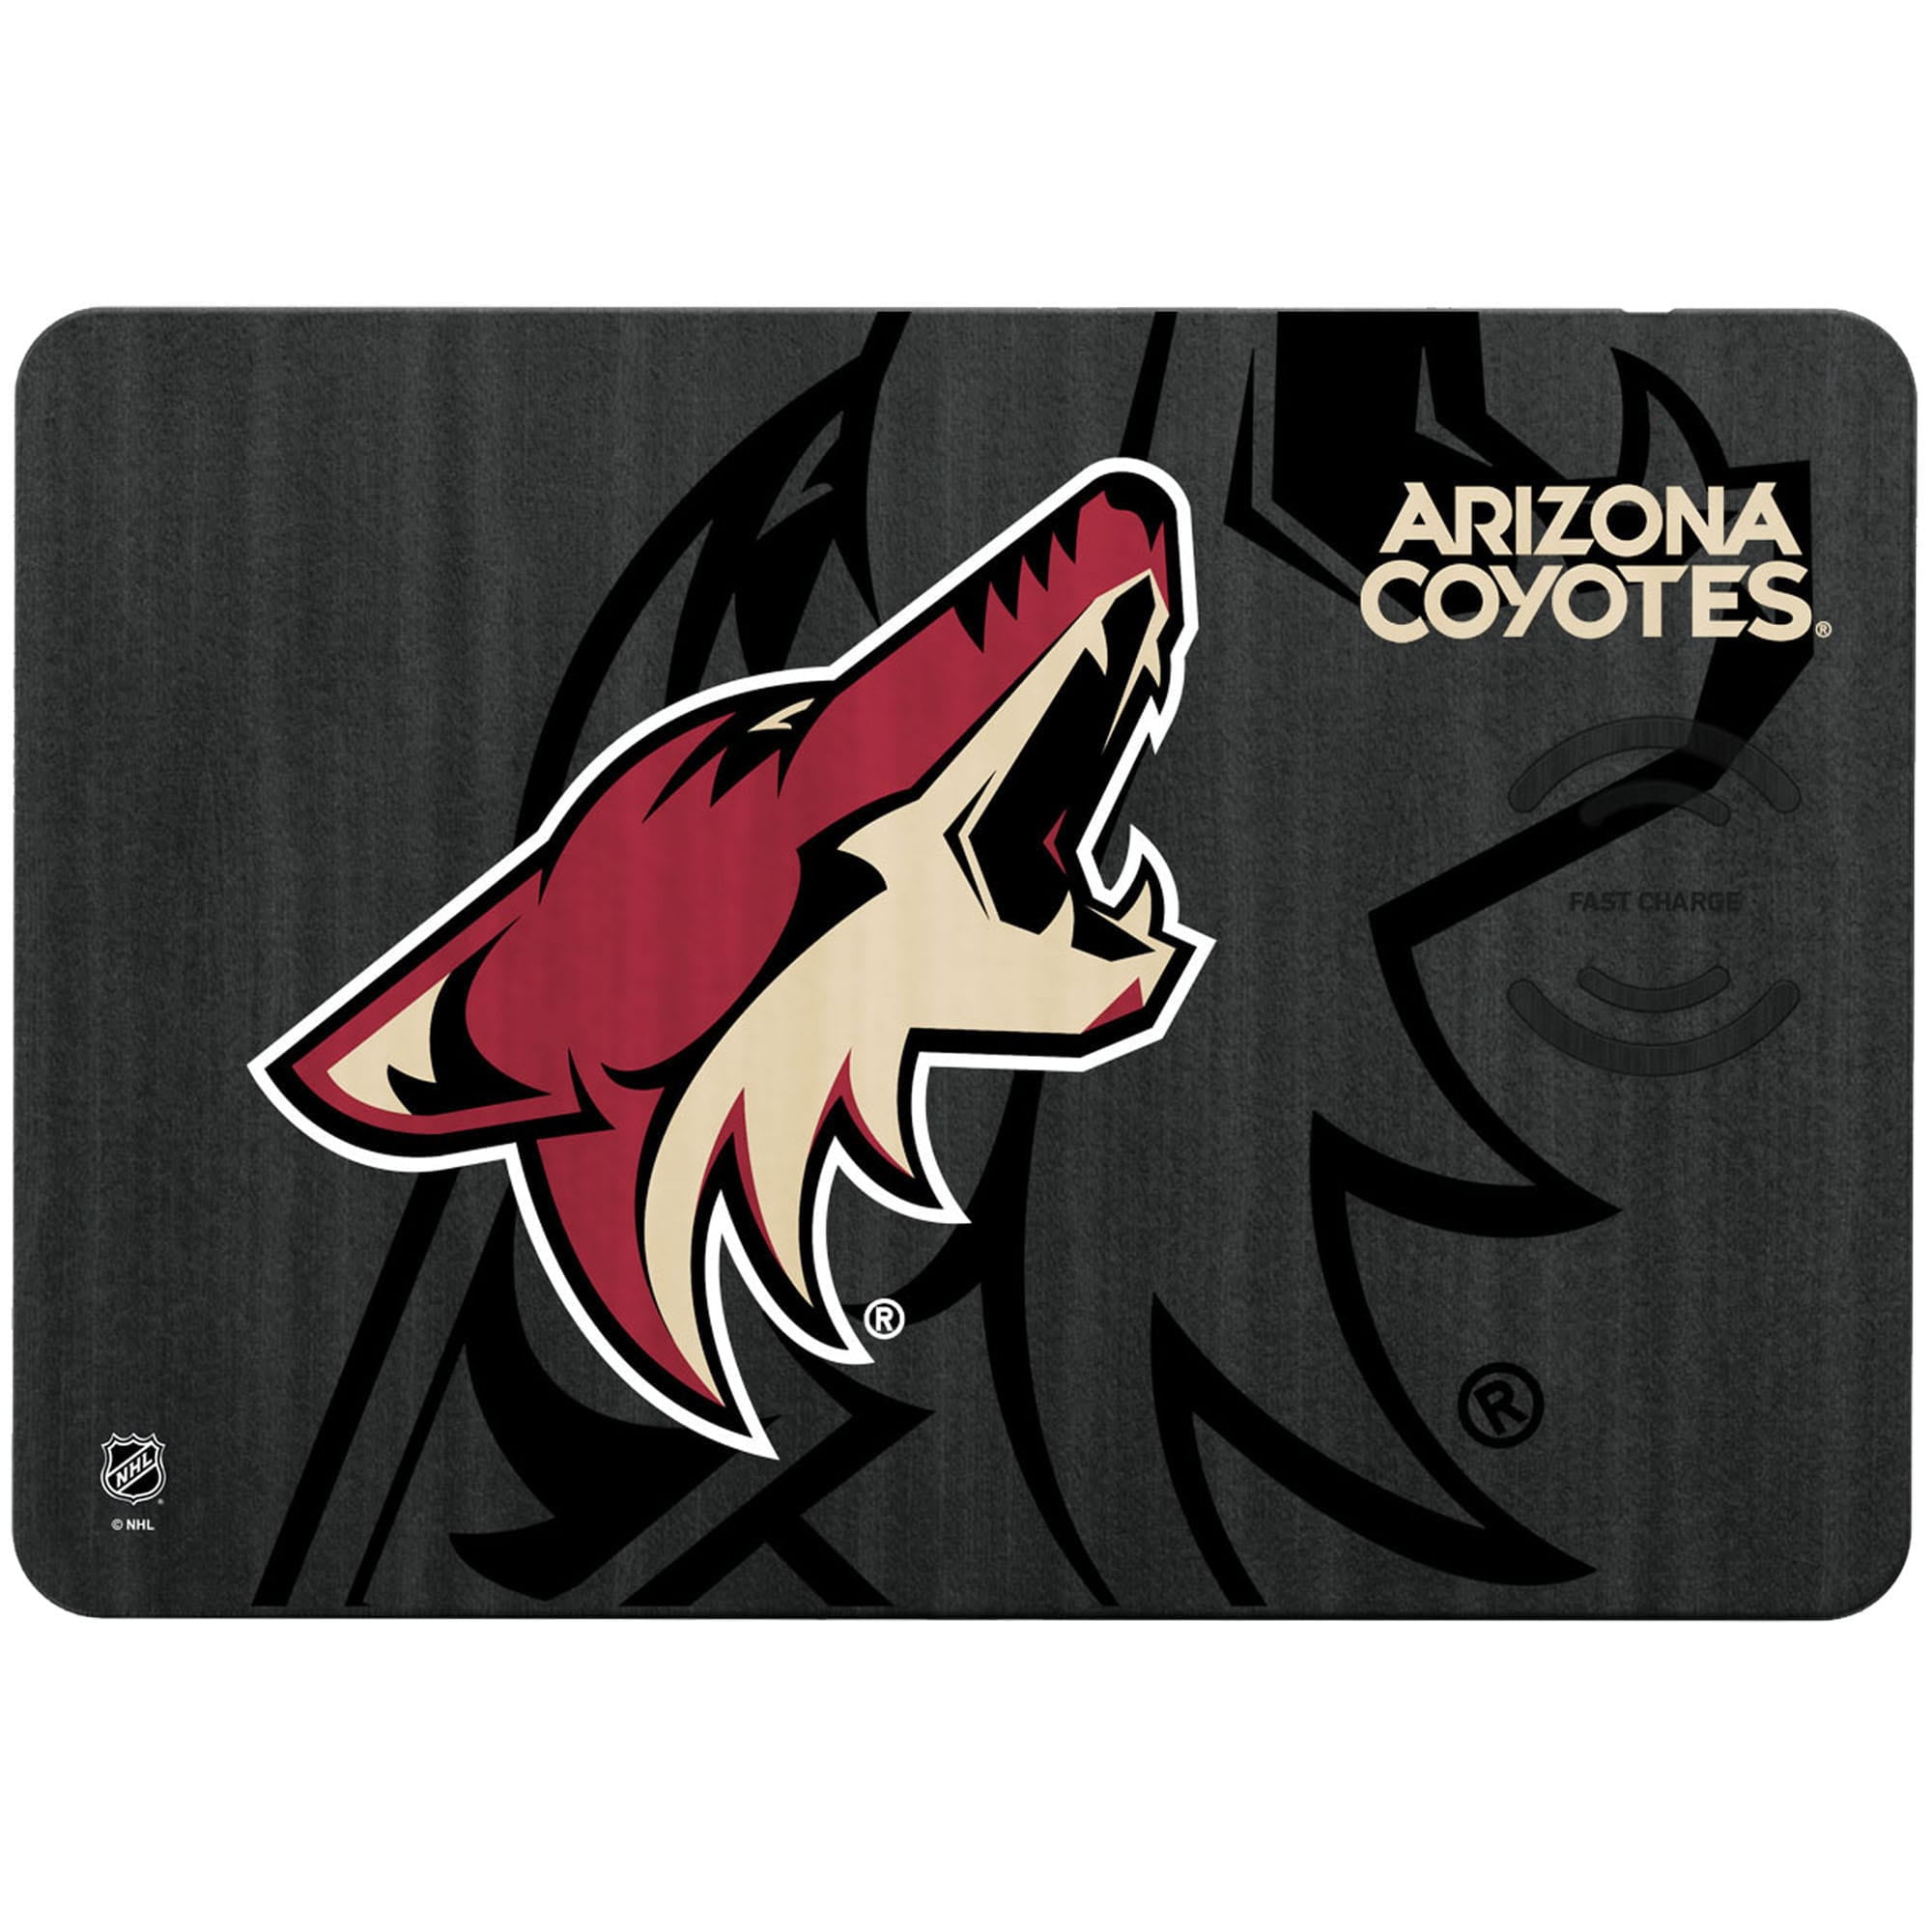 12" x 3" NHL® Hockey Phoenix Coyotes Bumper Sticker SUPPORT YOUR TEAM 